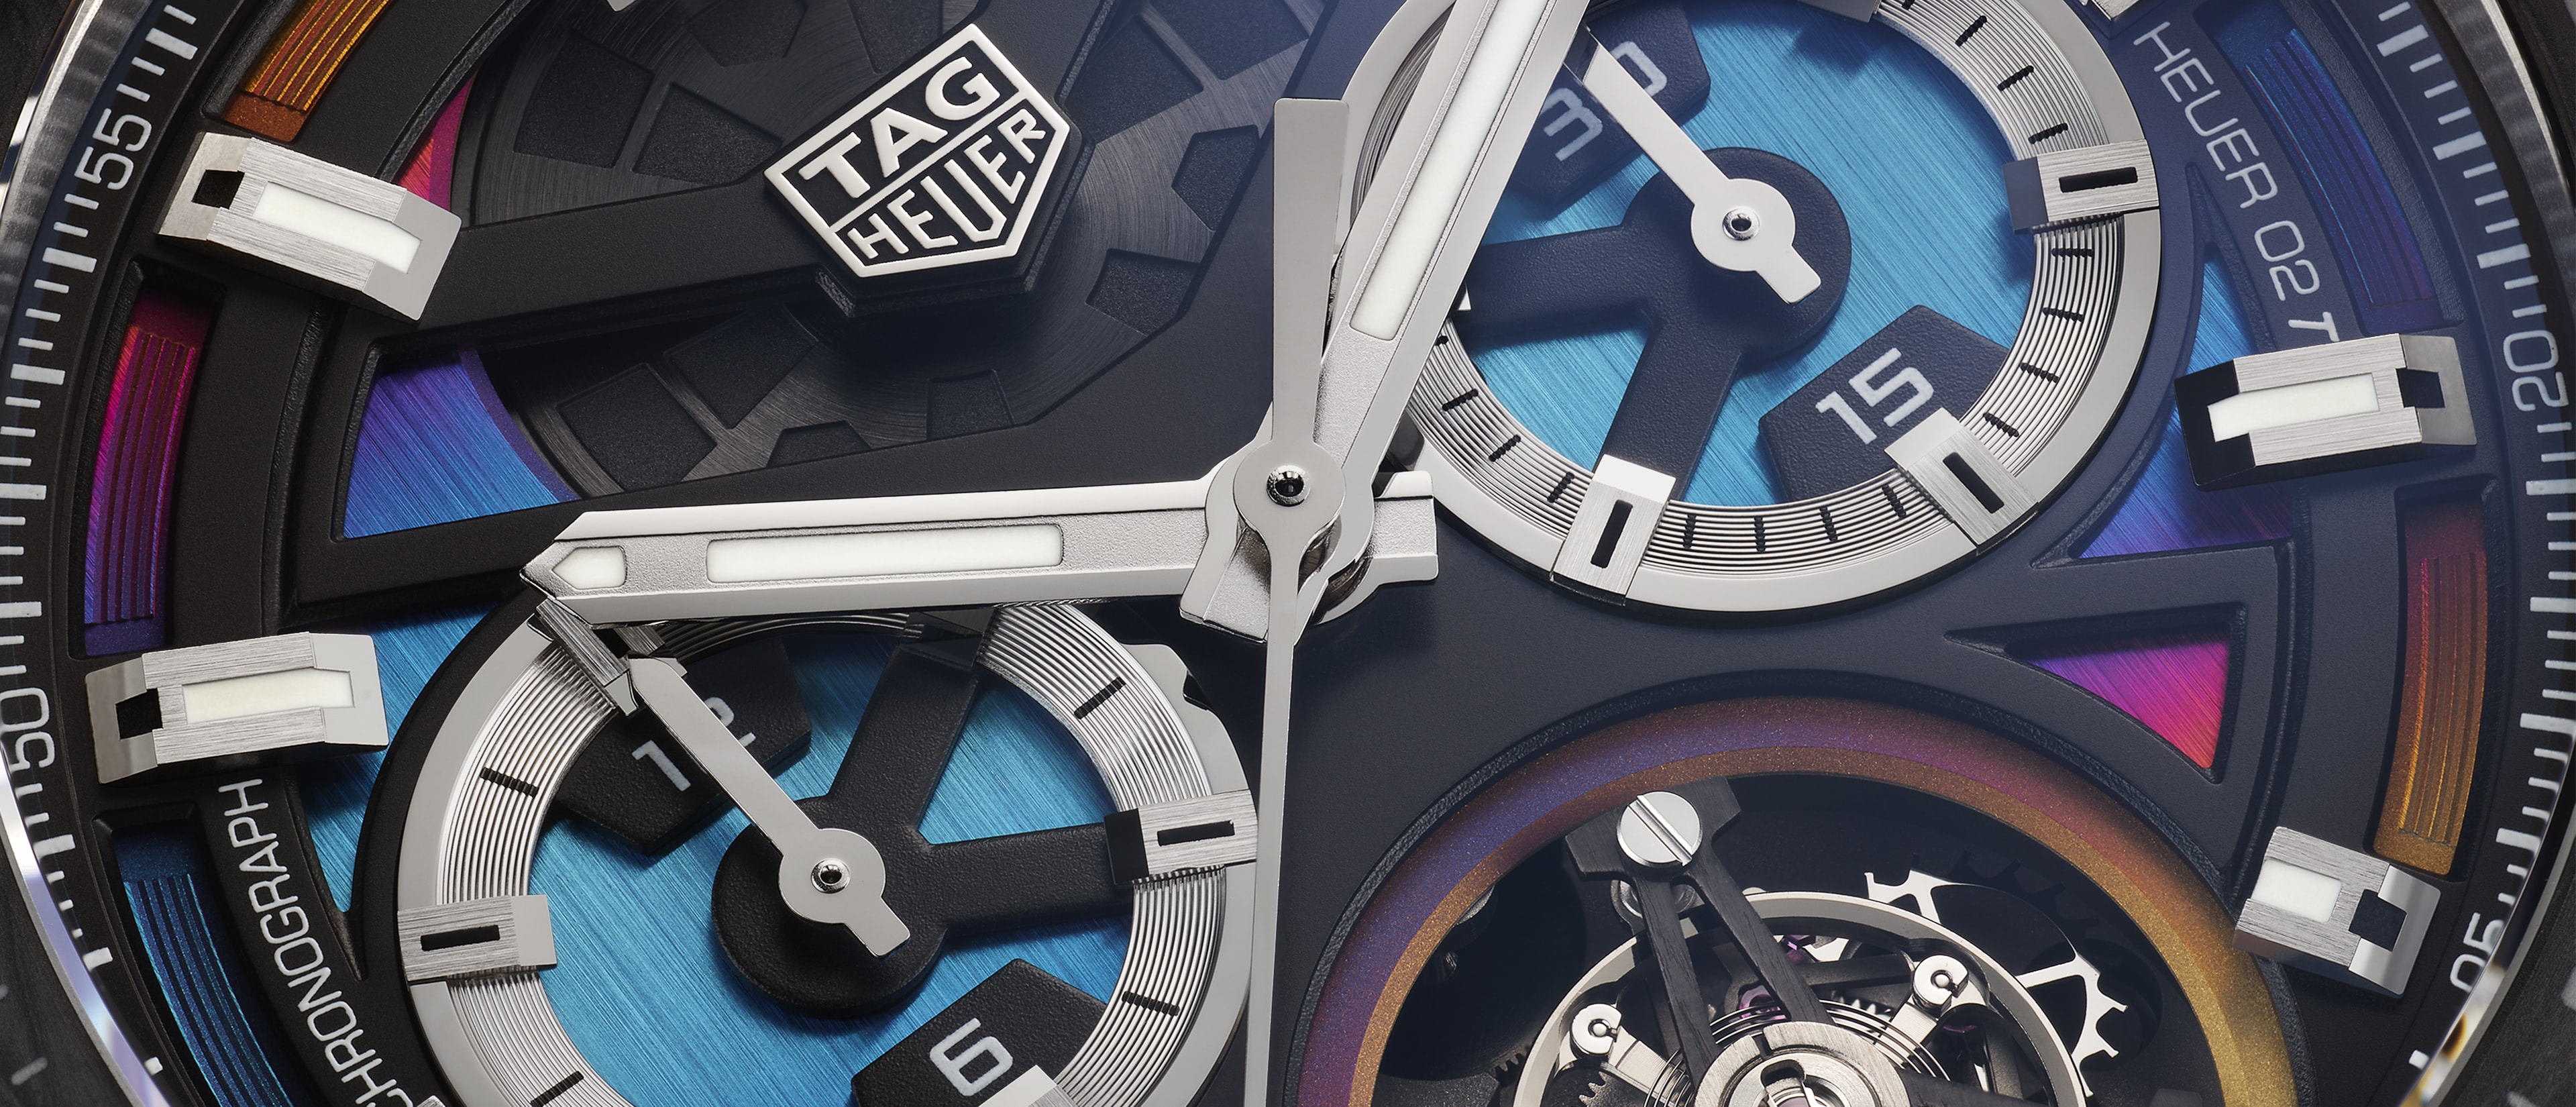 tag heuer chain watches